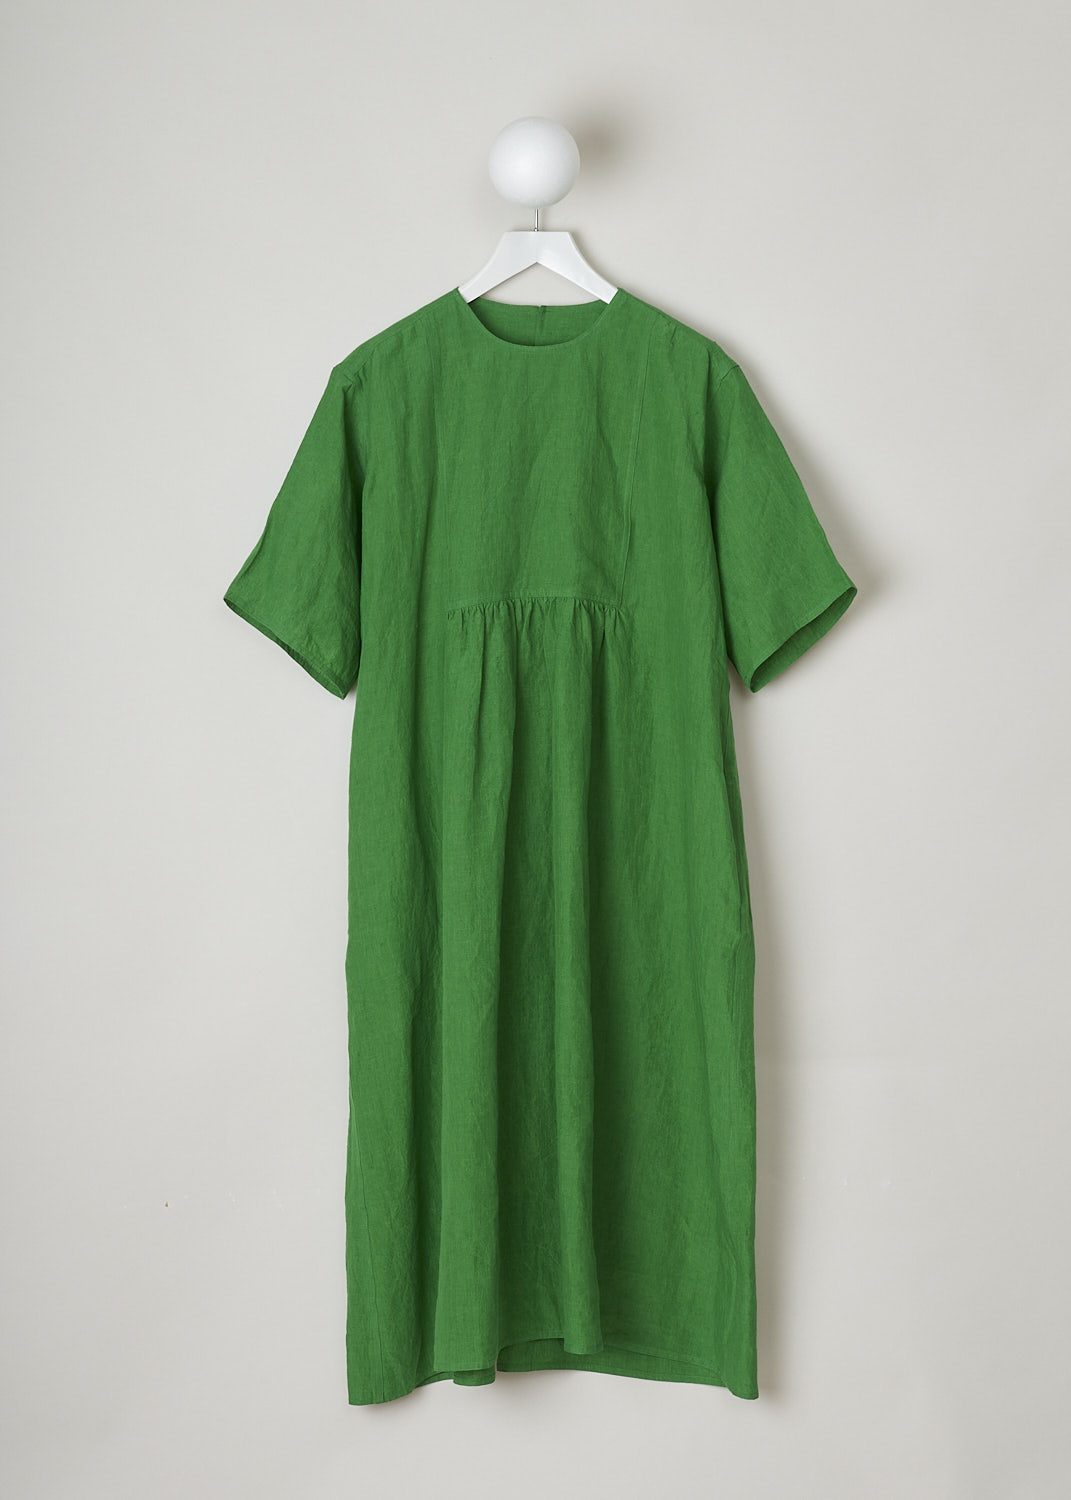 SOFIE Dâ€™HOORE, BRIGHT GREEN LINEN DARNELLE DRESS, DARNELLE_LIFE_GRASS, Green, Top, This oversized green midi dress features a round neckline, dropped shoulders and short sleeves. The A-line dress has a square bib-like front with pleated details below. Concealed in the side seams, slanted pockets can be found. The dress has a straight hemline with slits on either side. 

